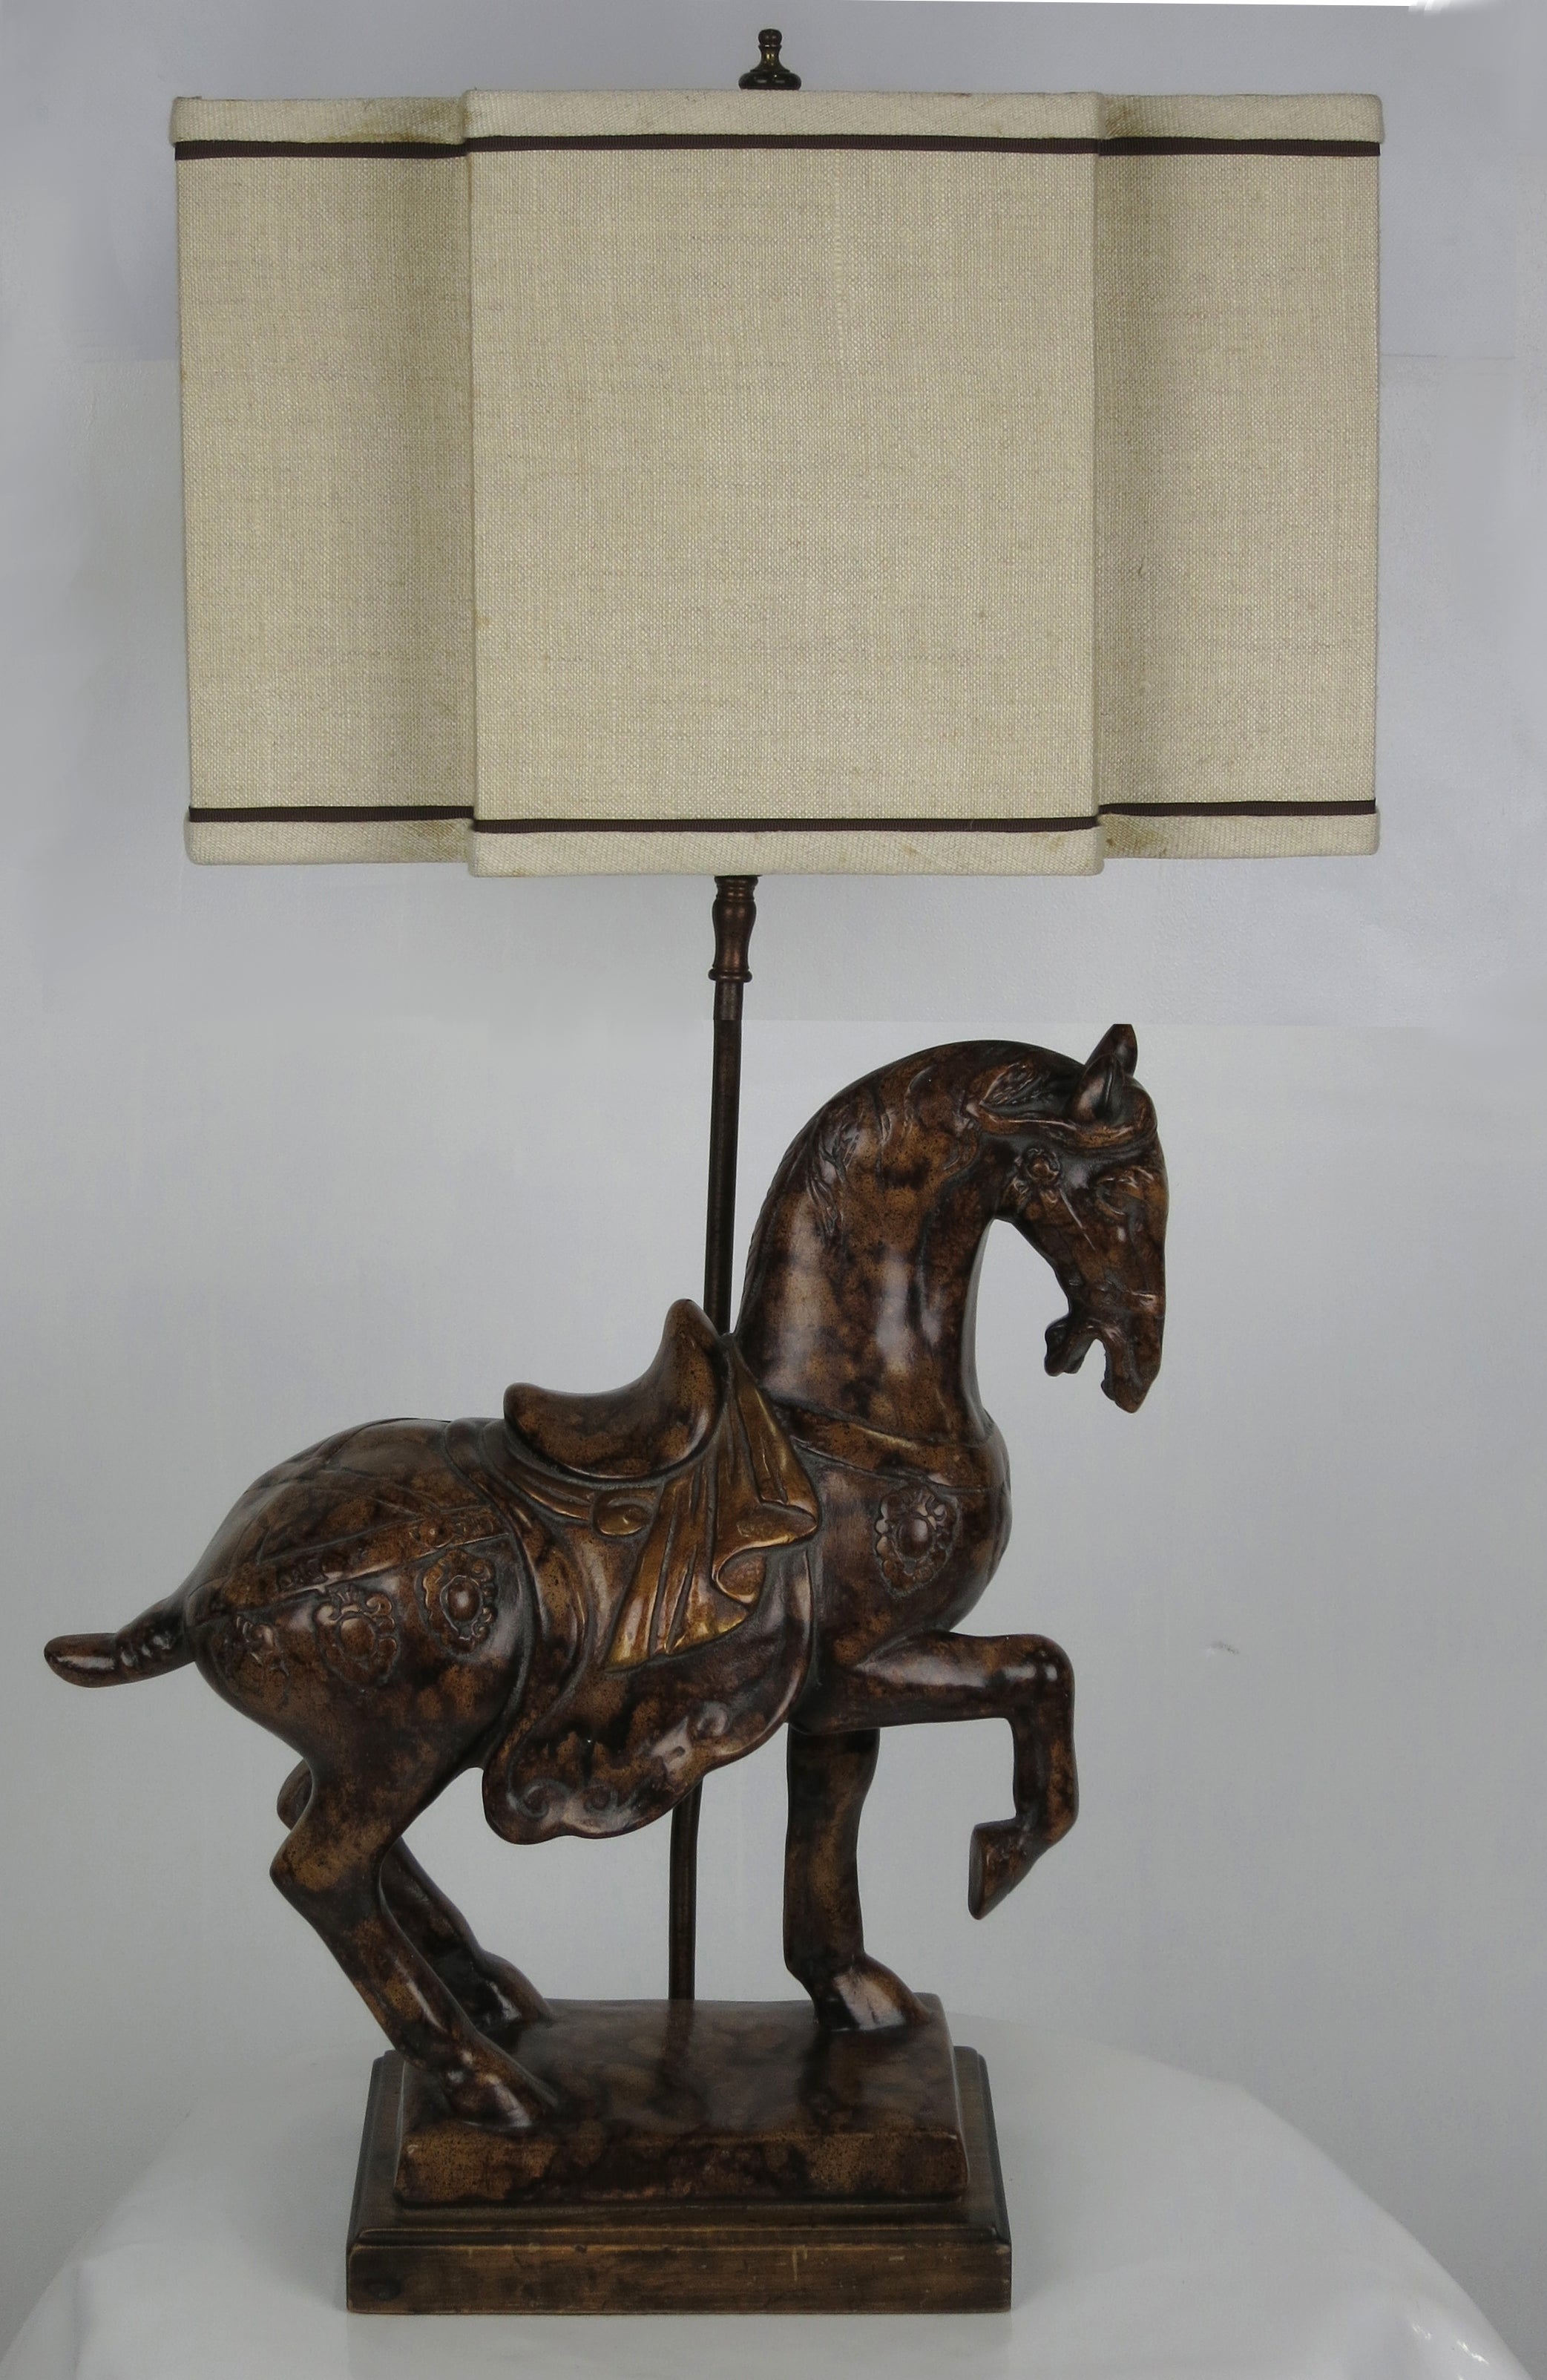 Tang Horse Lamp by Frederick Cooper